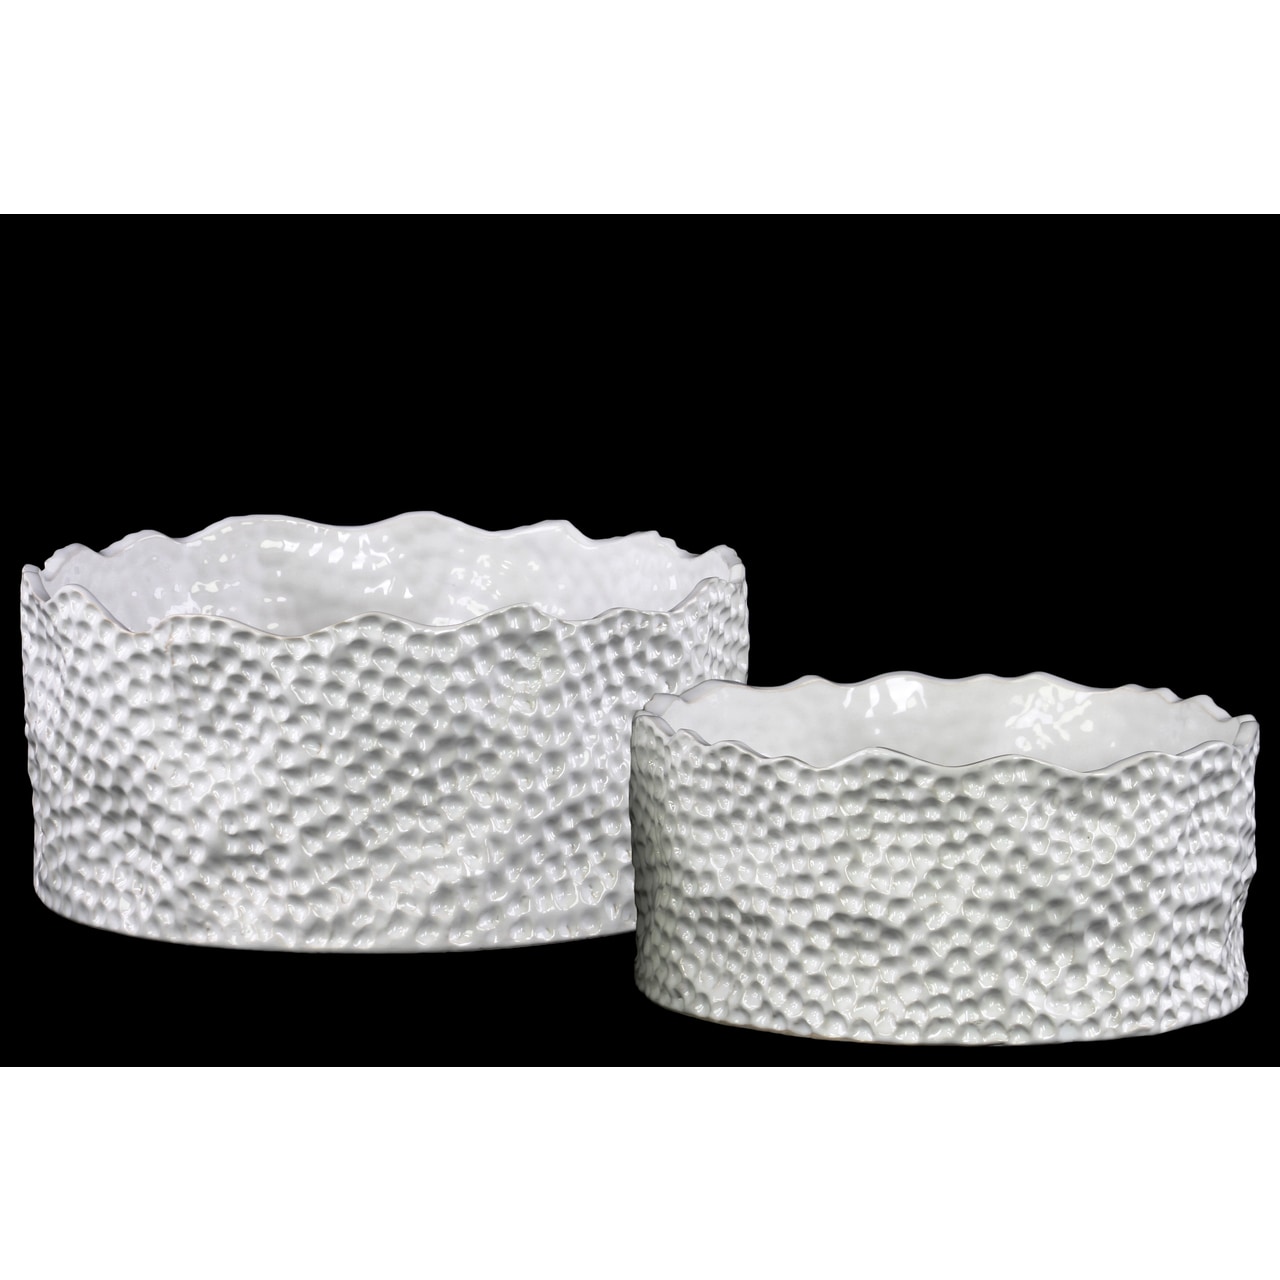 Urban Trends 28814 Ceramic Round Pot Set of Two Dimpled Gloss Finish White 